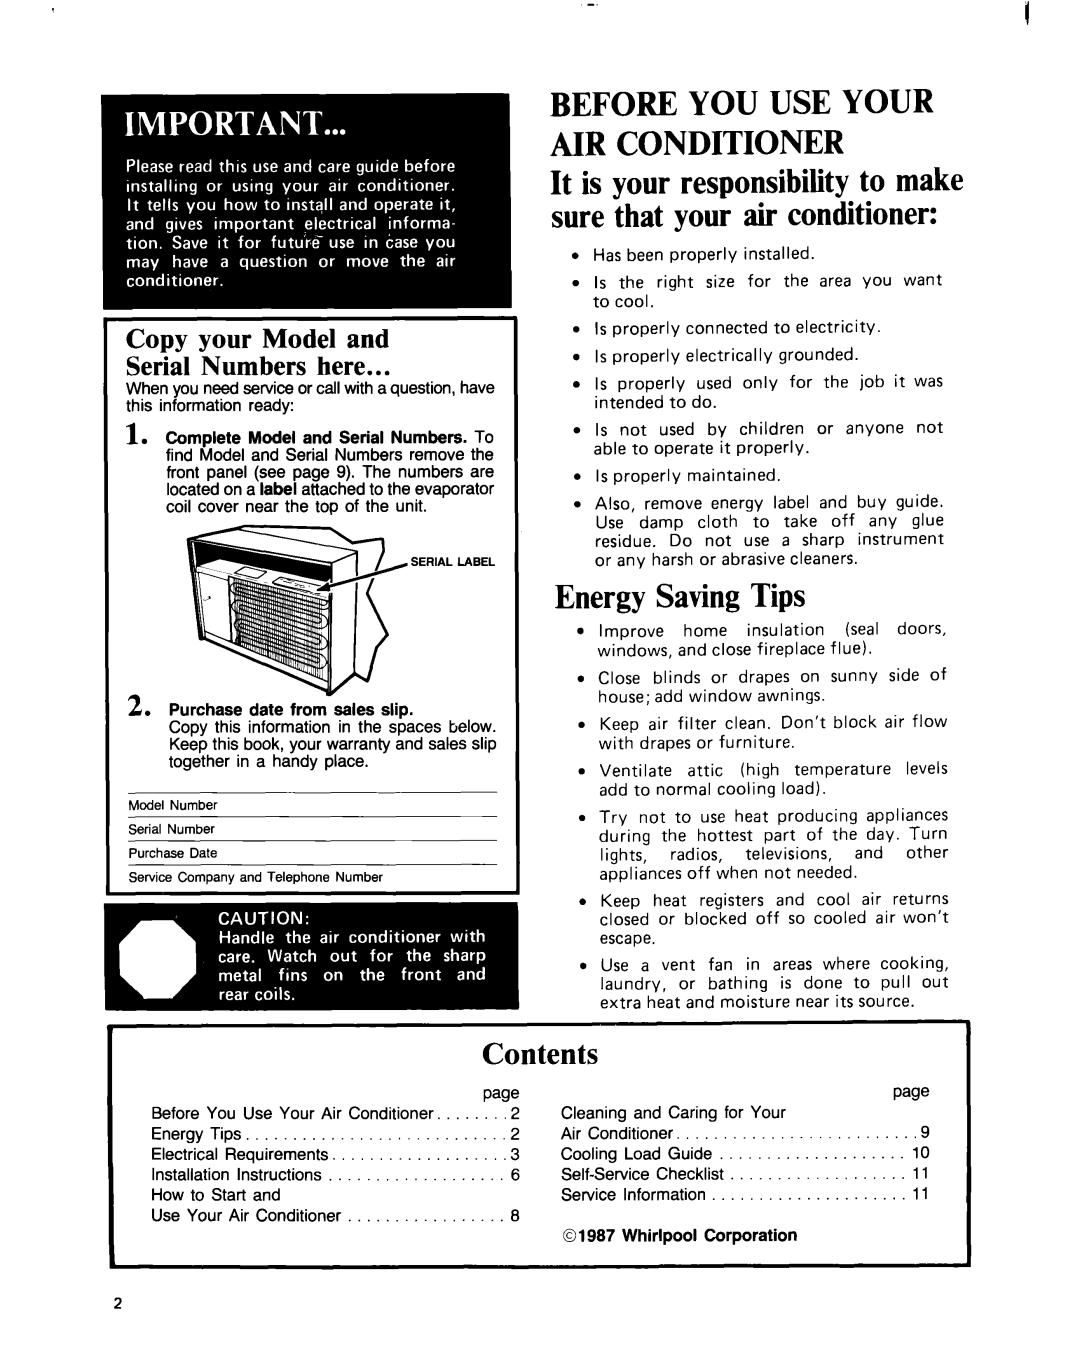 Whirlpool ACE094XM0 manual Energy SavingTips, Before You Use Your Air Conditioner, Contents 